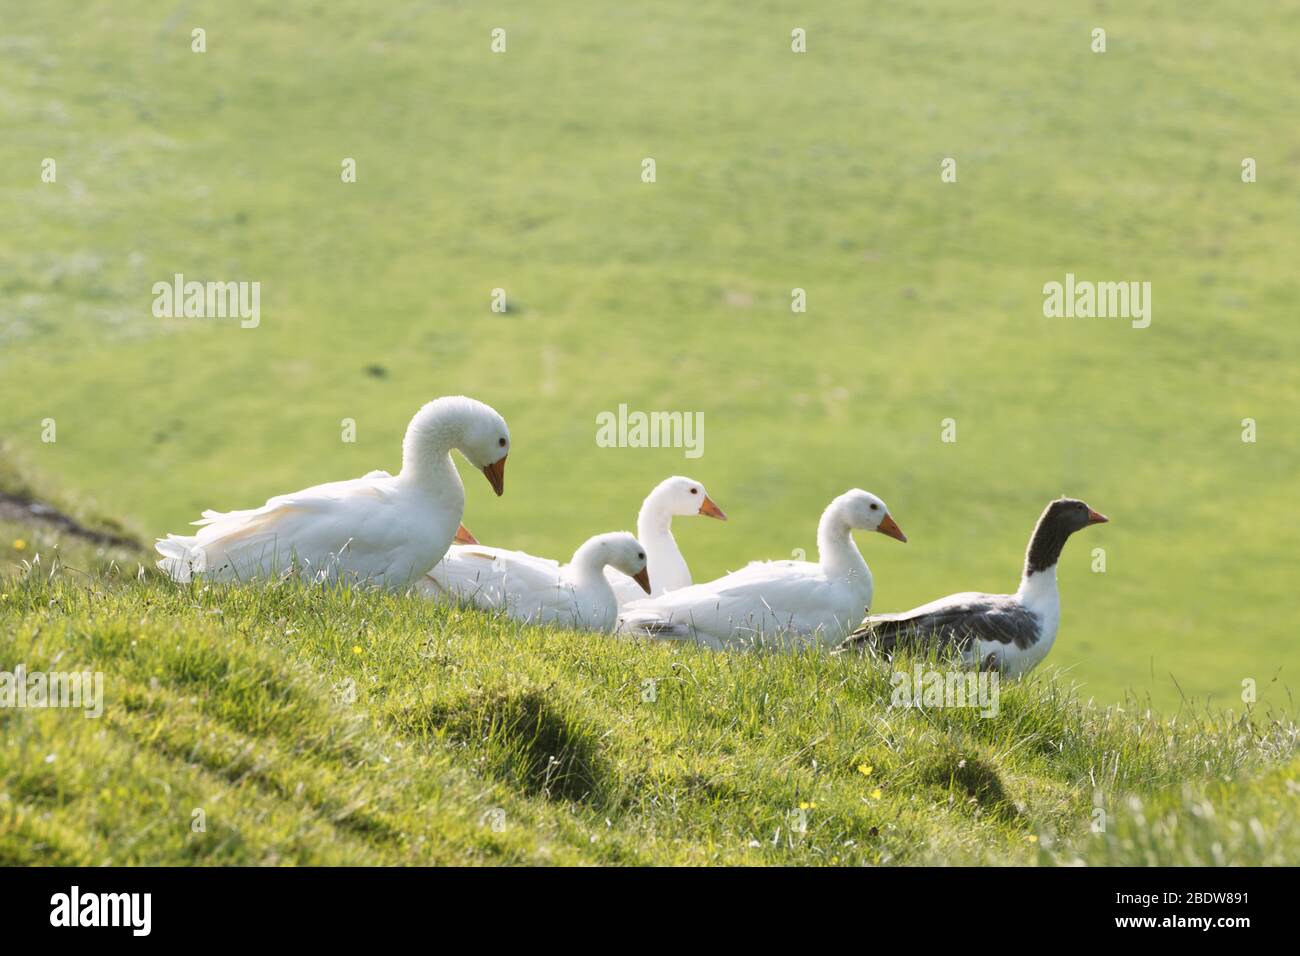 White and gray domestic geese in green grass. Faroe islands, Denmark Stock Photo